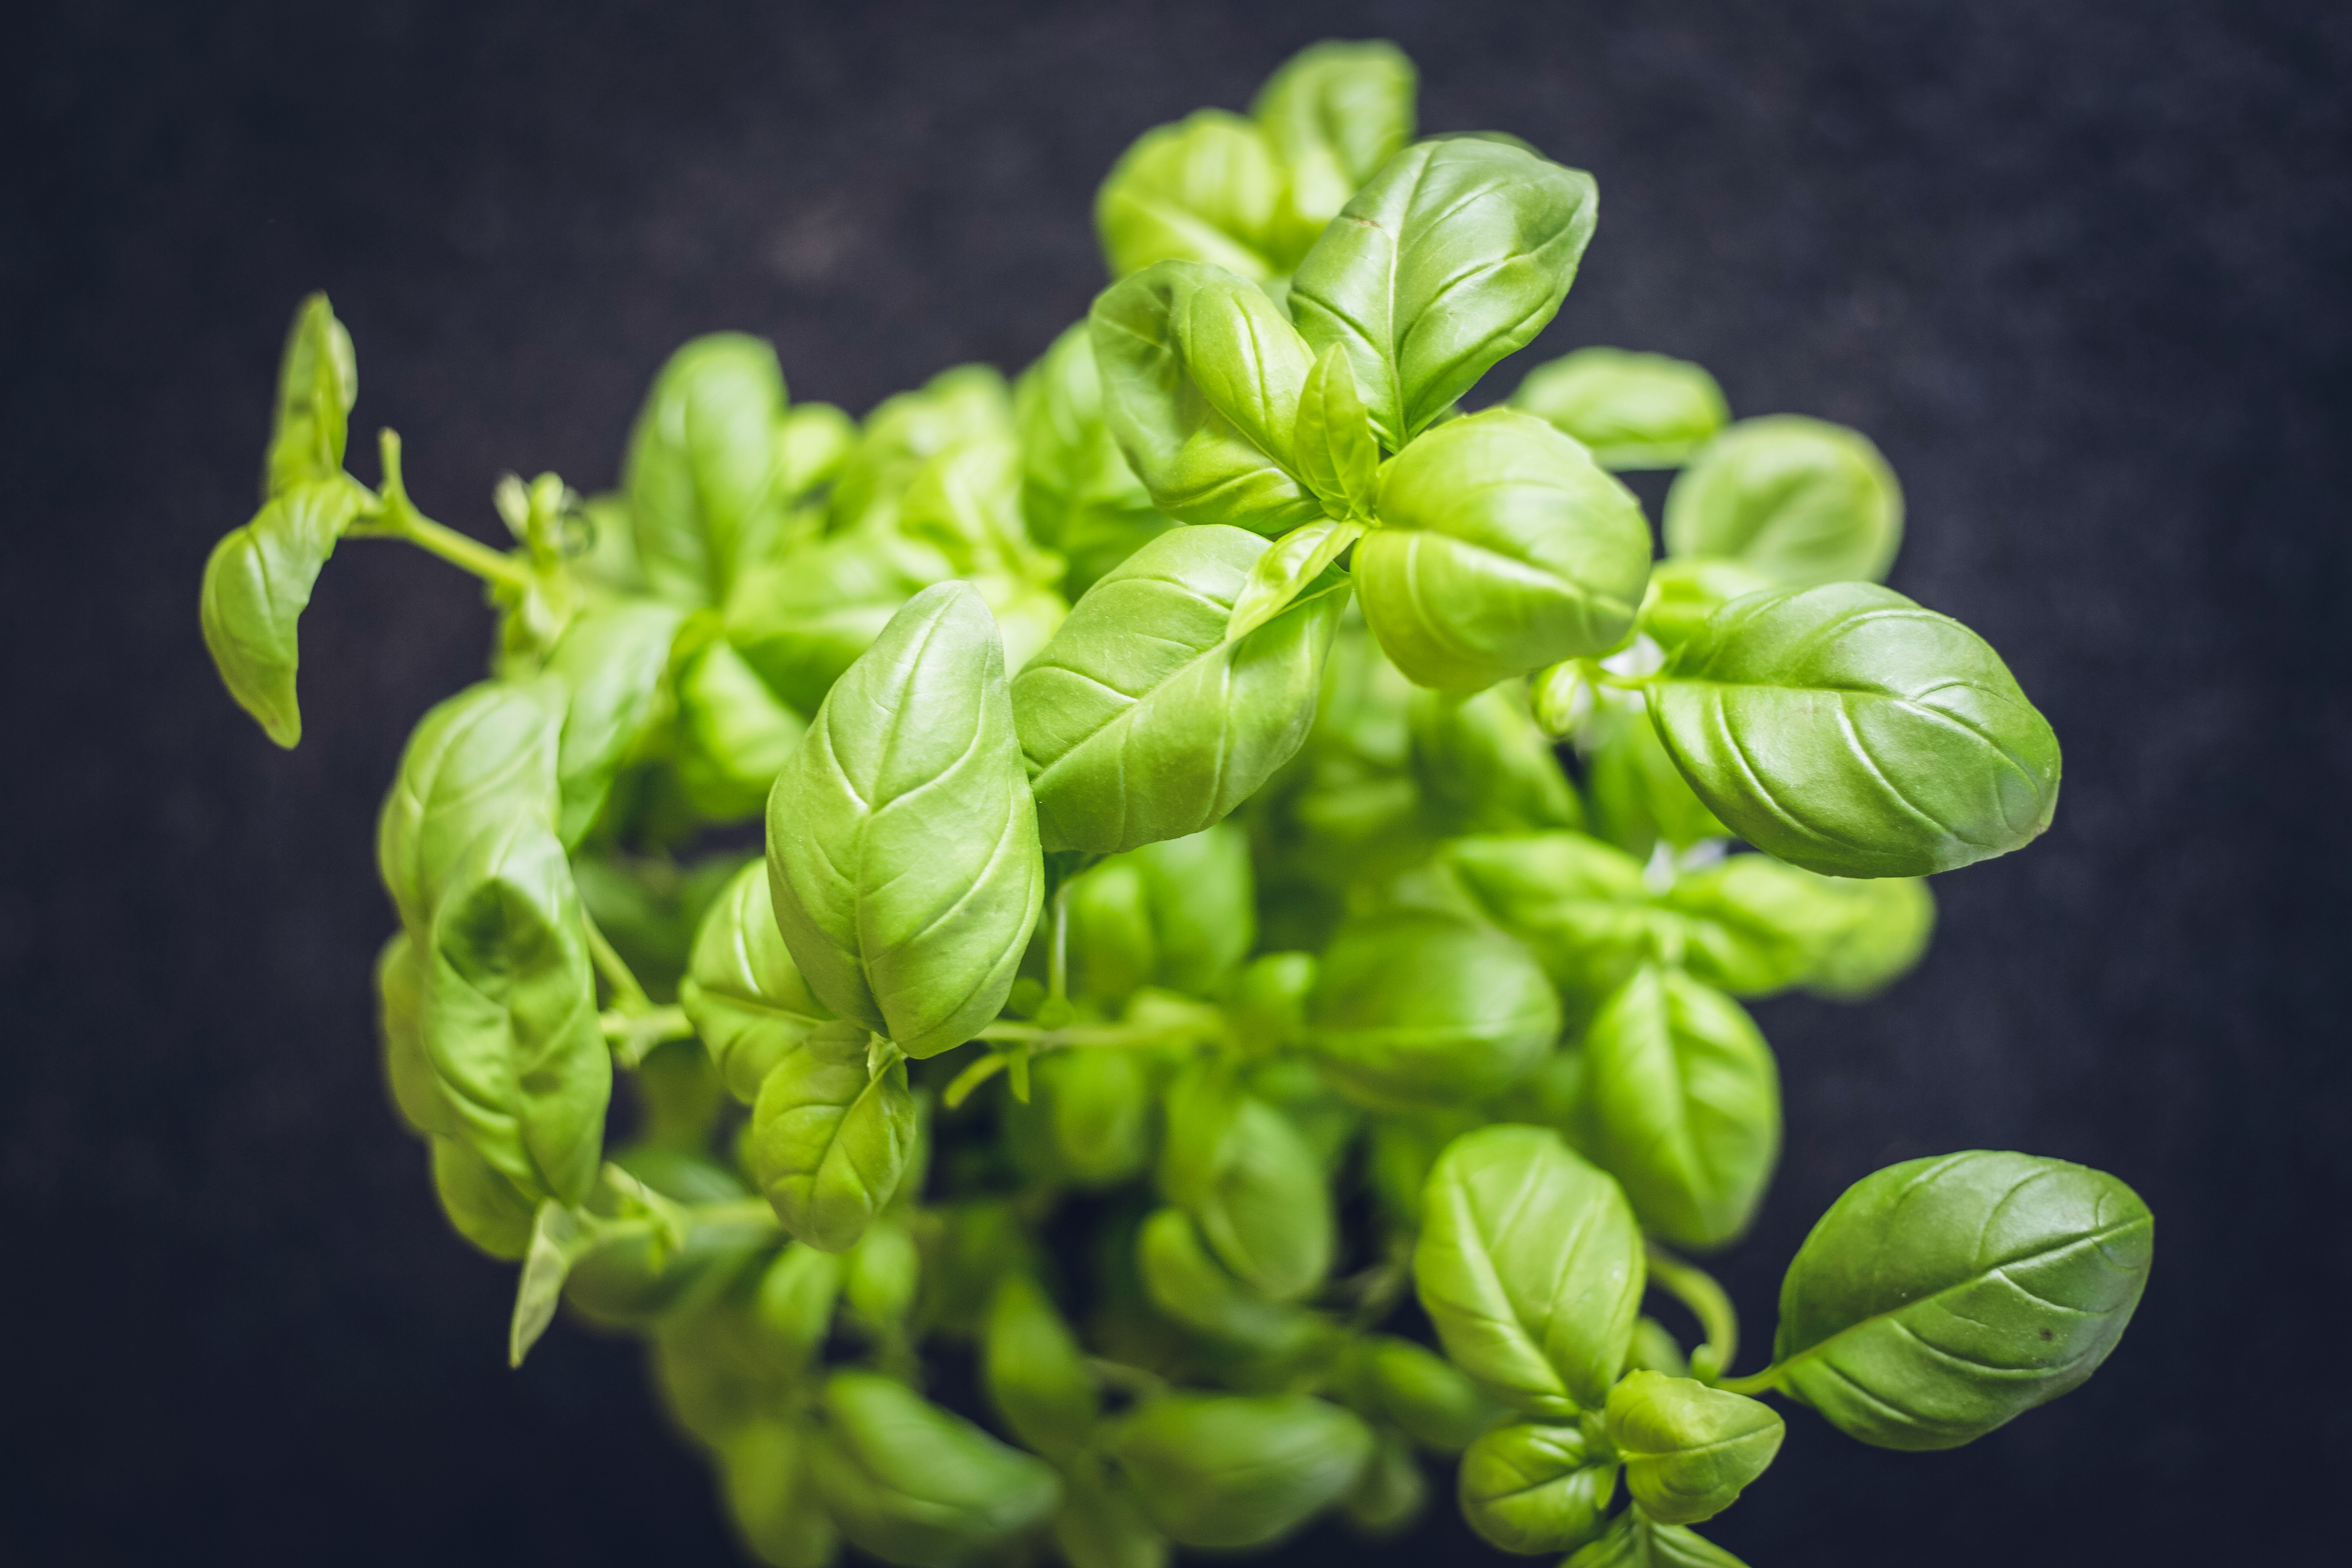 Basil improves the flavor of tomatoes and repels common insect pests.